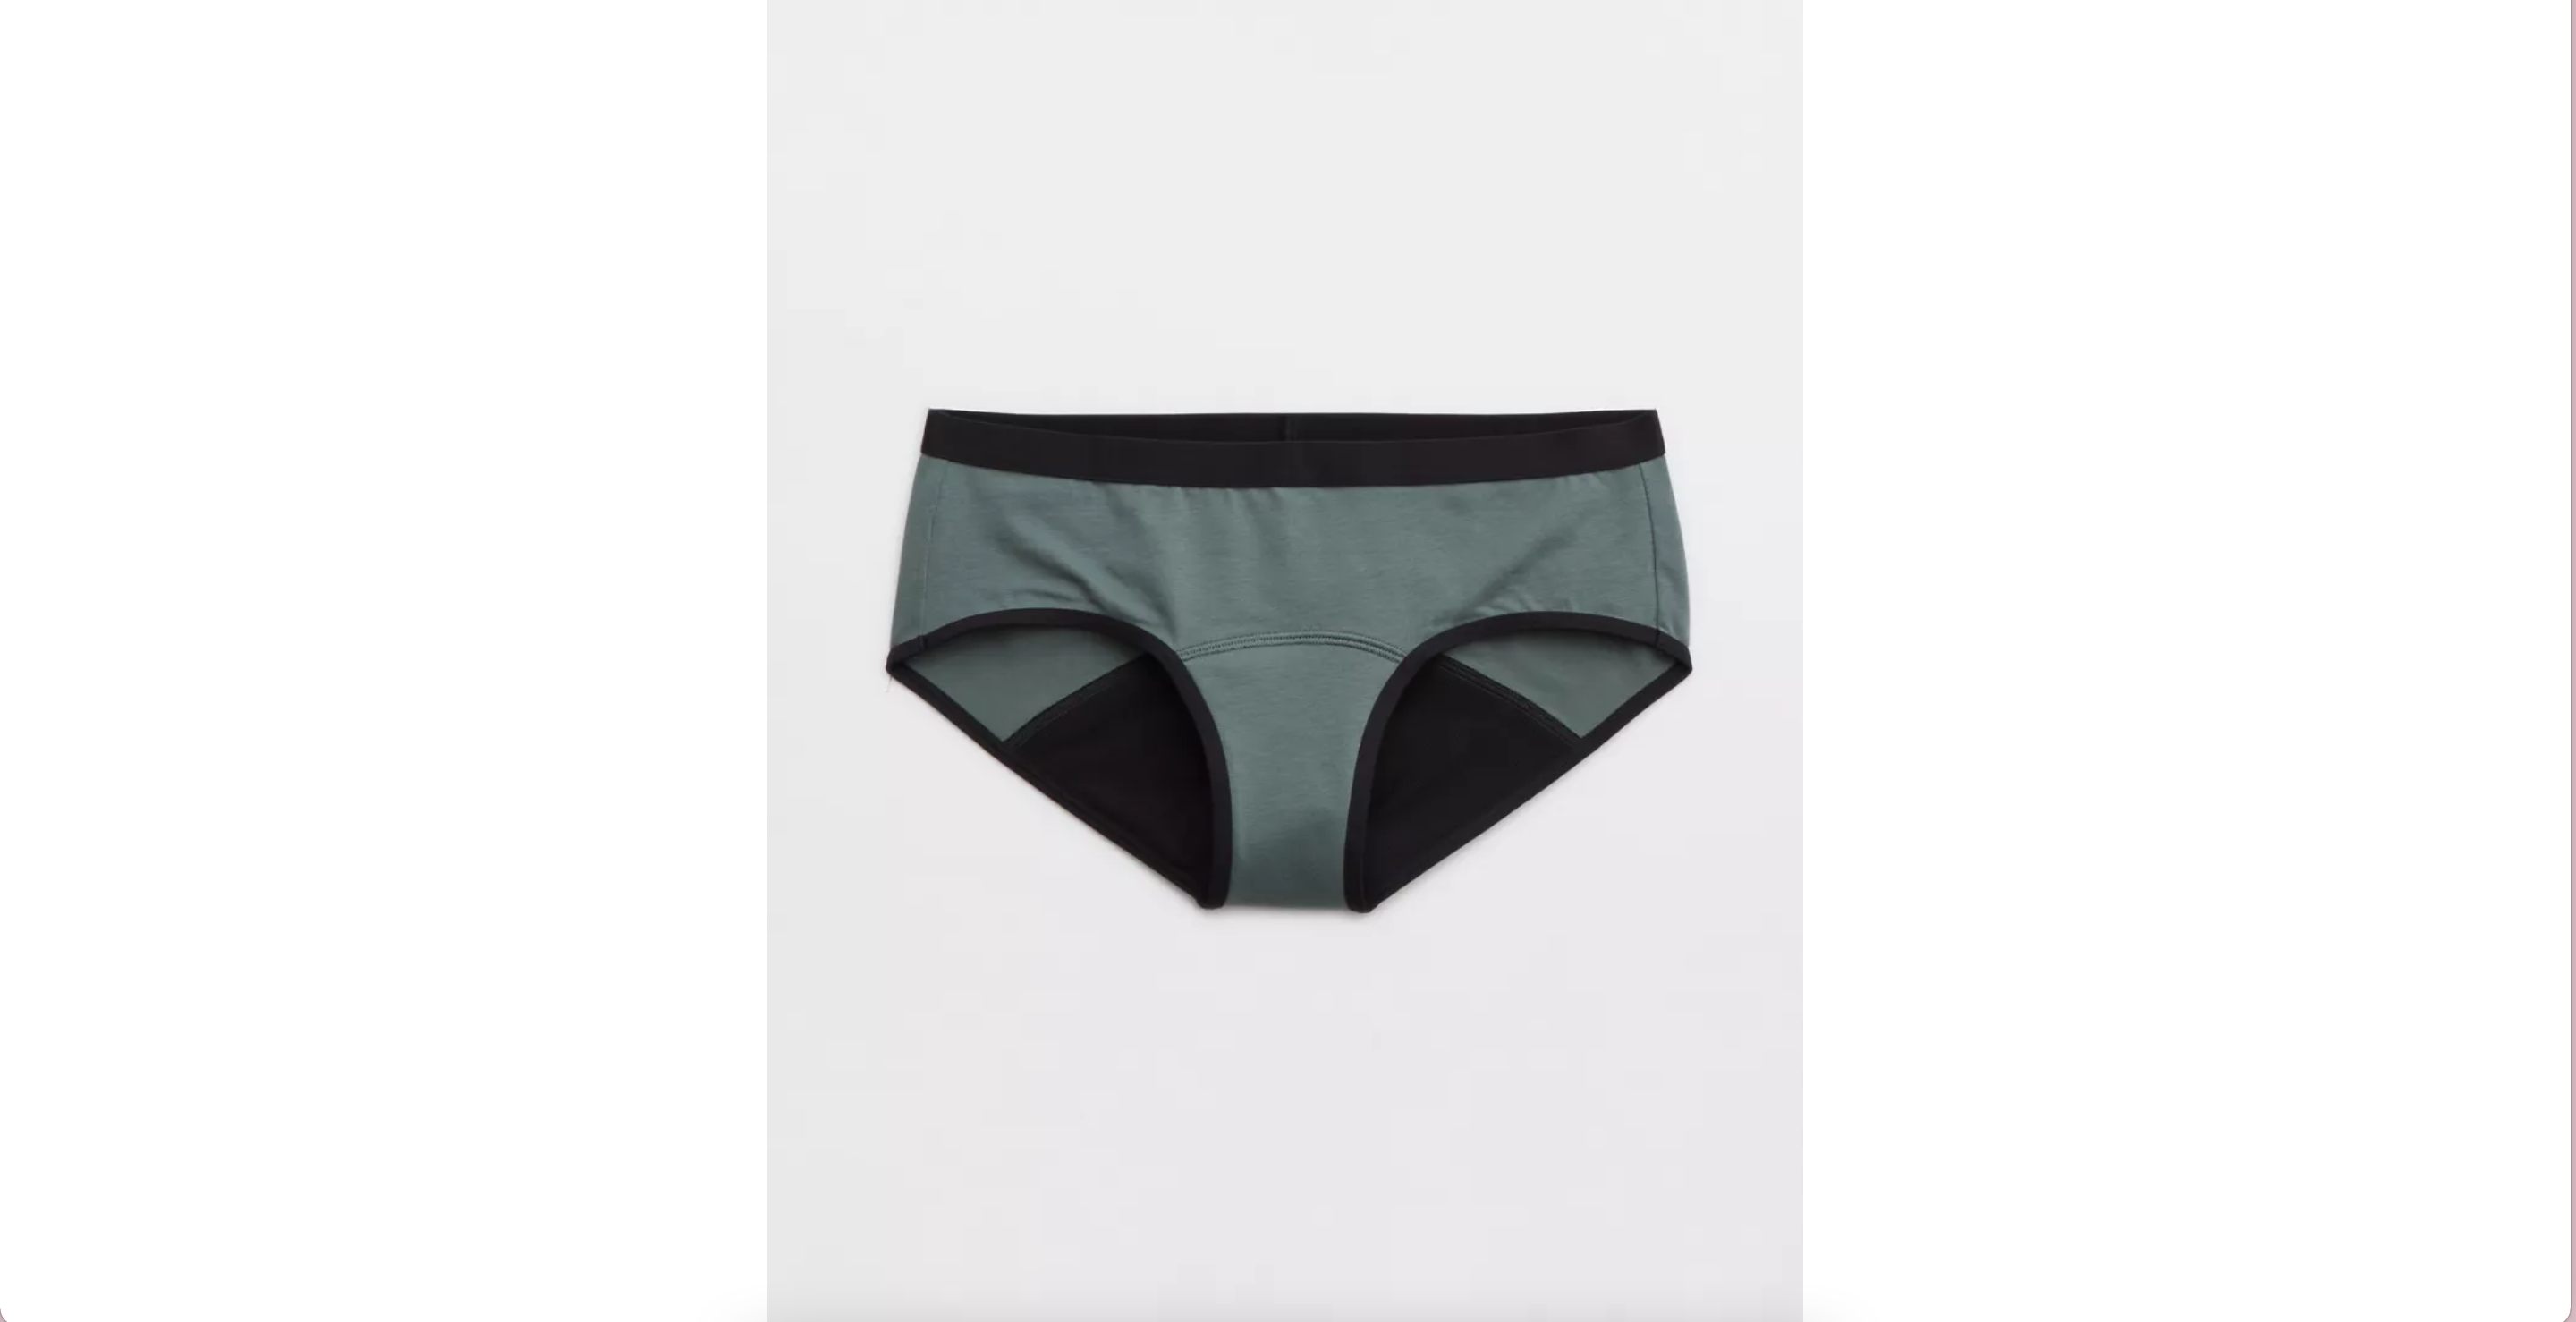 Goat Union Overnight Period Underwear for Women - Absorbent Period